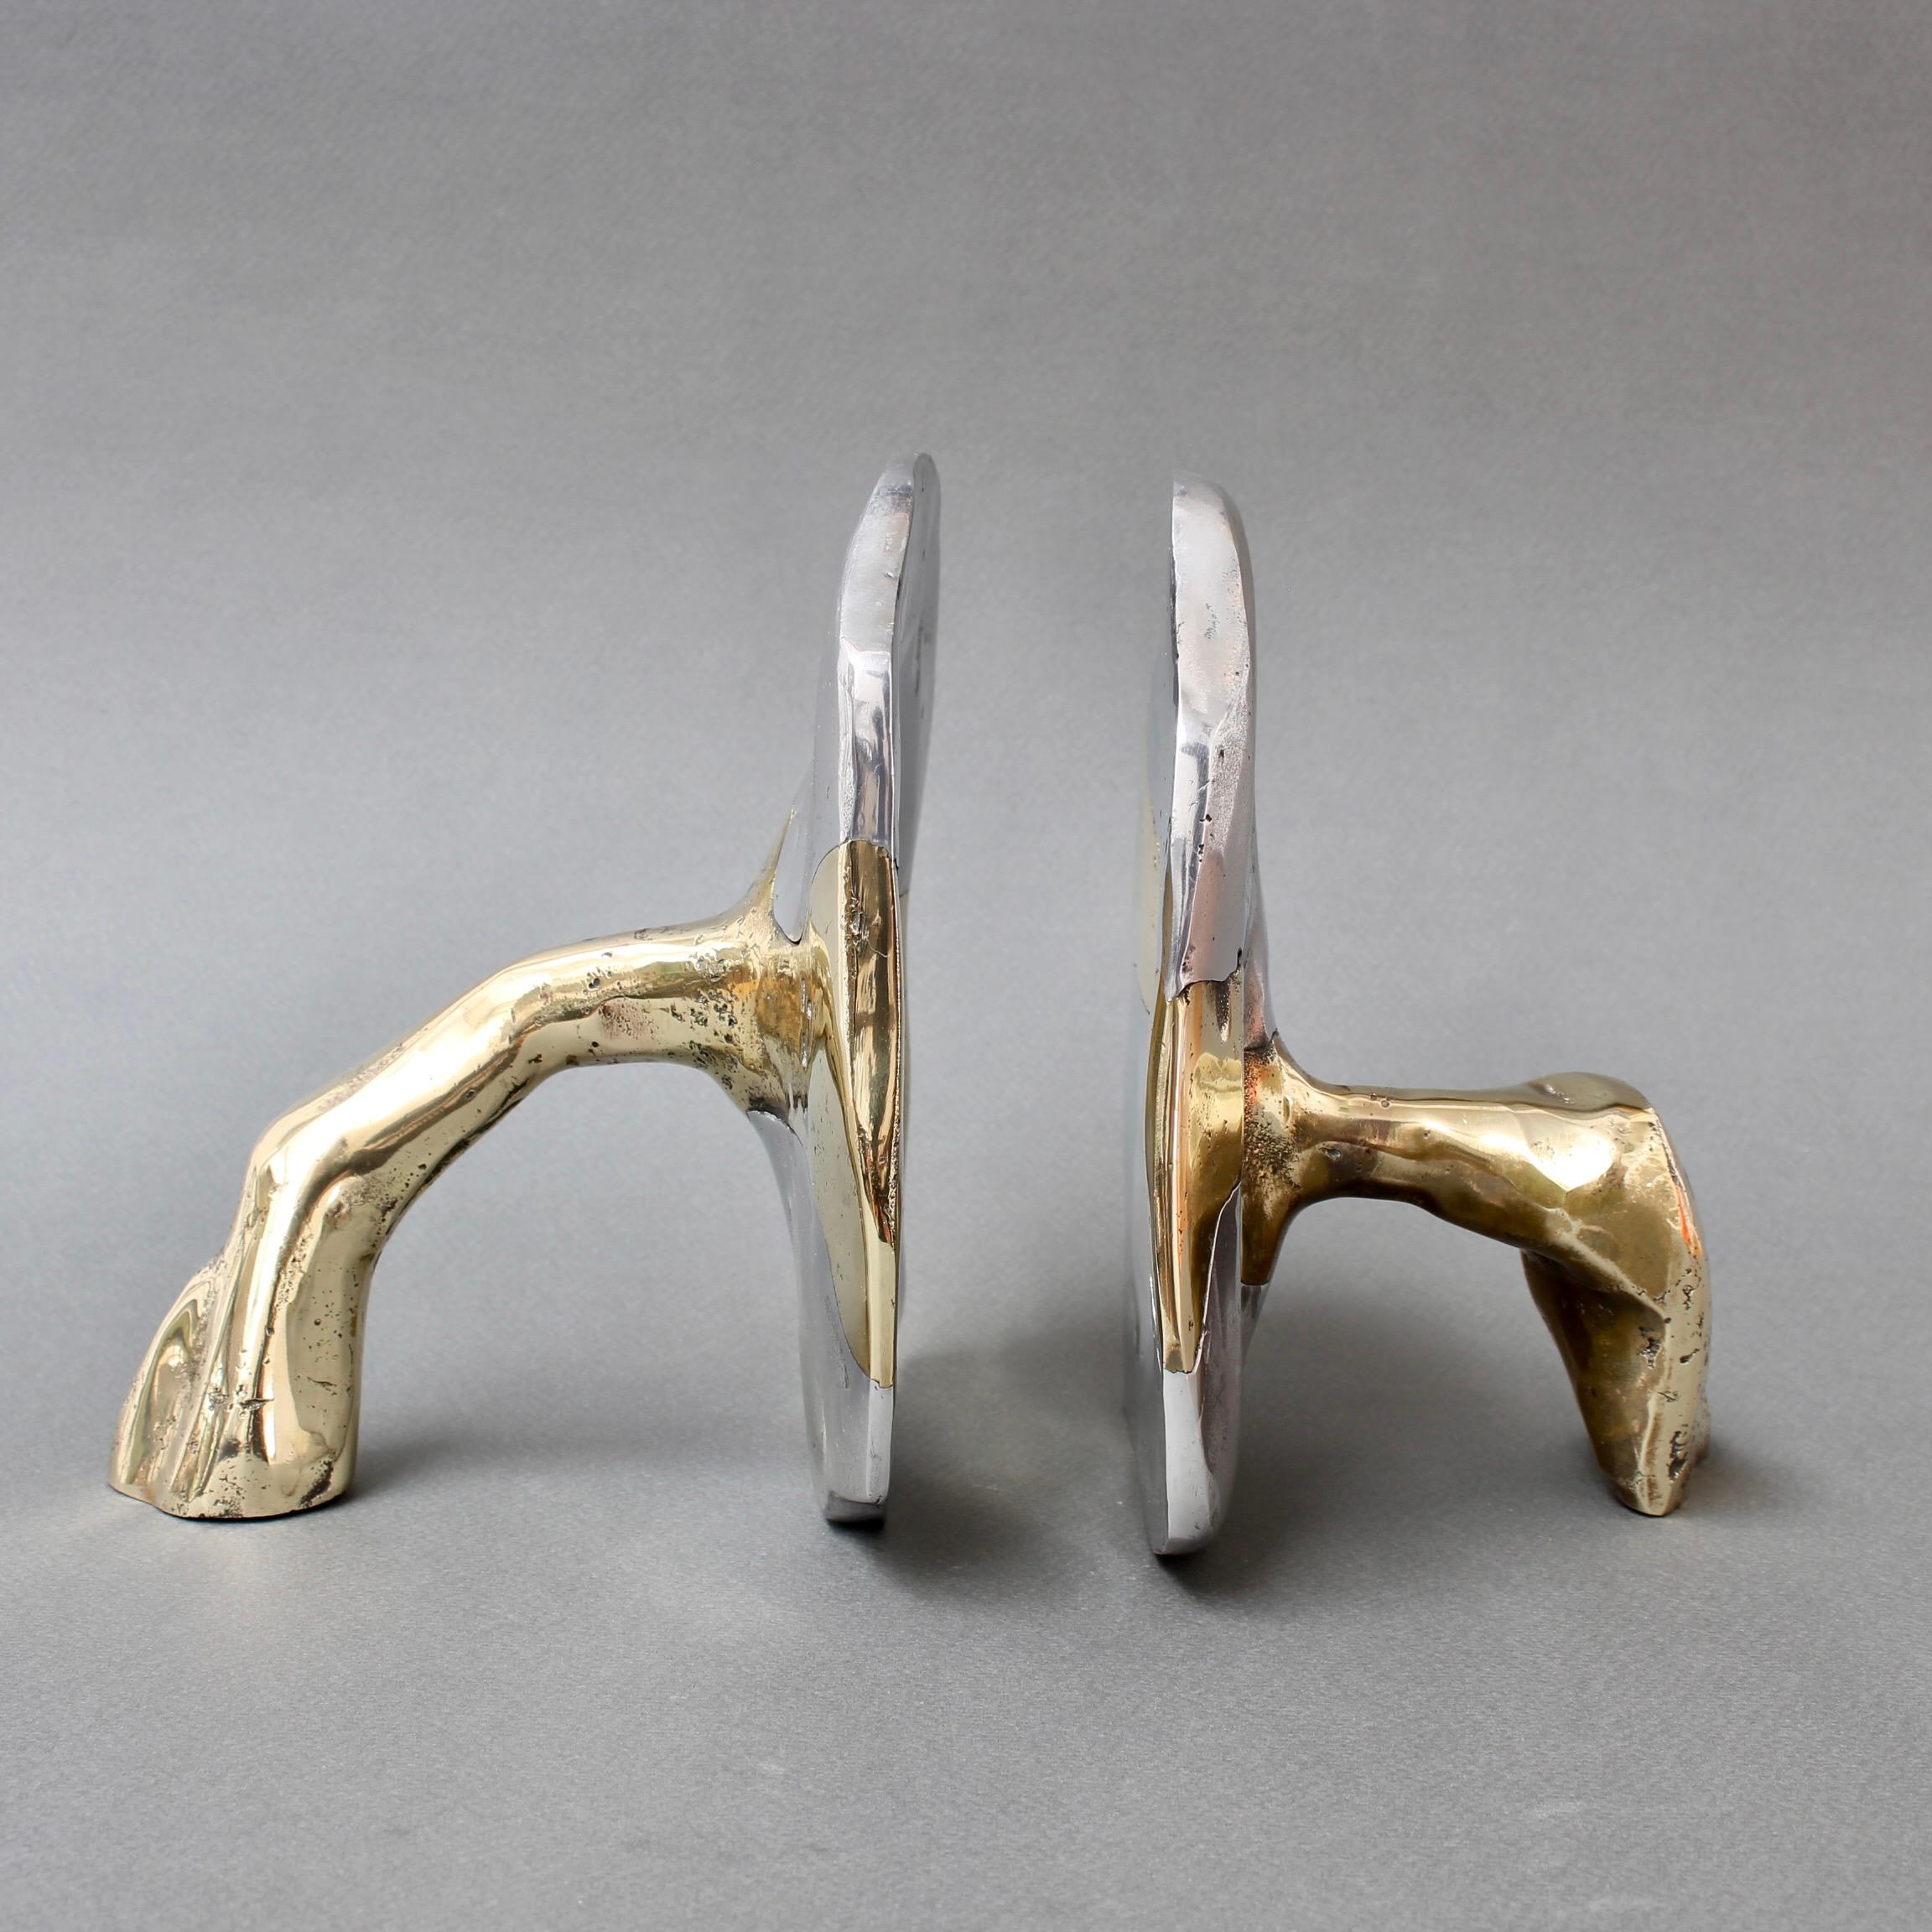 Brass and aluminium Brutalist style bookends by David Marshall (circa 1980s). These are weighty, cratered and raw as if plucked right from nature. The brass support pieces meld with the aluminium seamlessly to form the bookends. Standing alone,